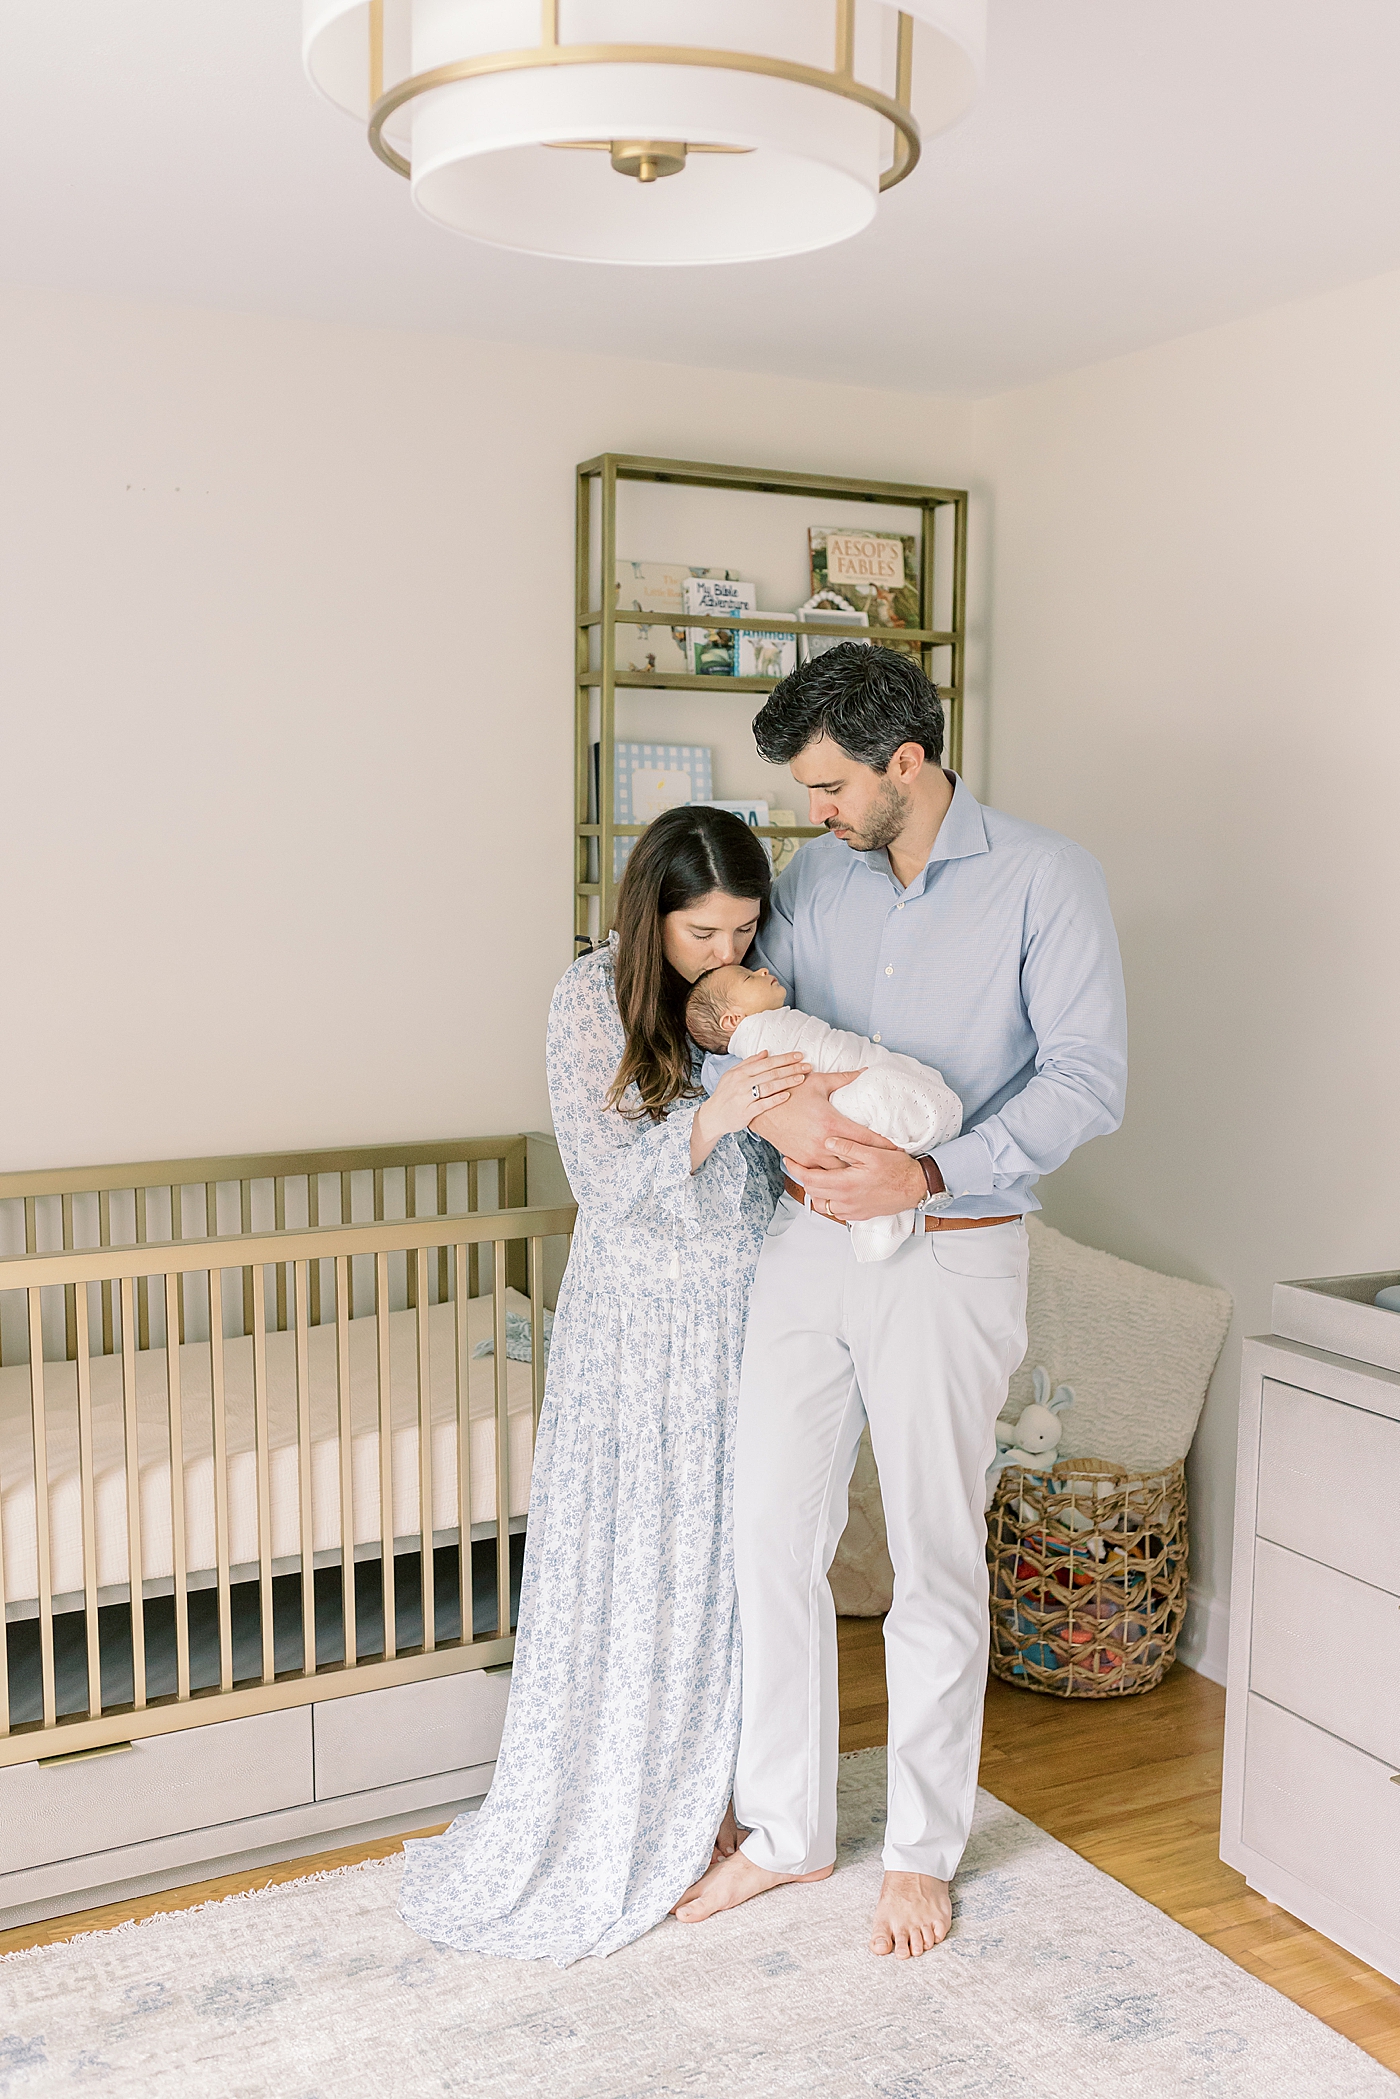 Mom and dad snuggling their new baby | Photo by Mount Pleasant Newborn Photographer Caitlyn Motycka